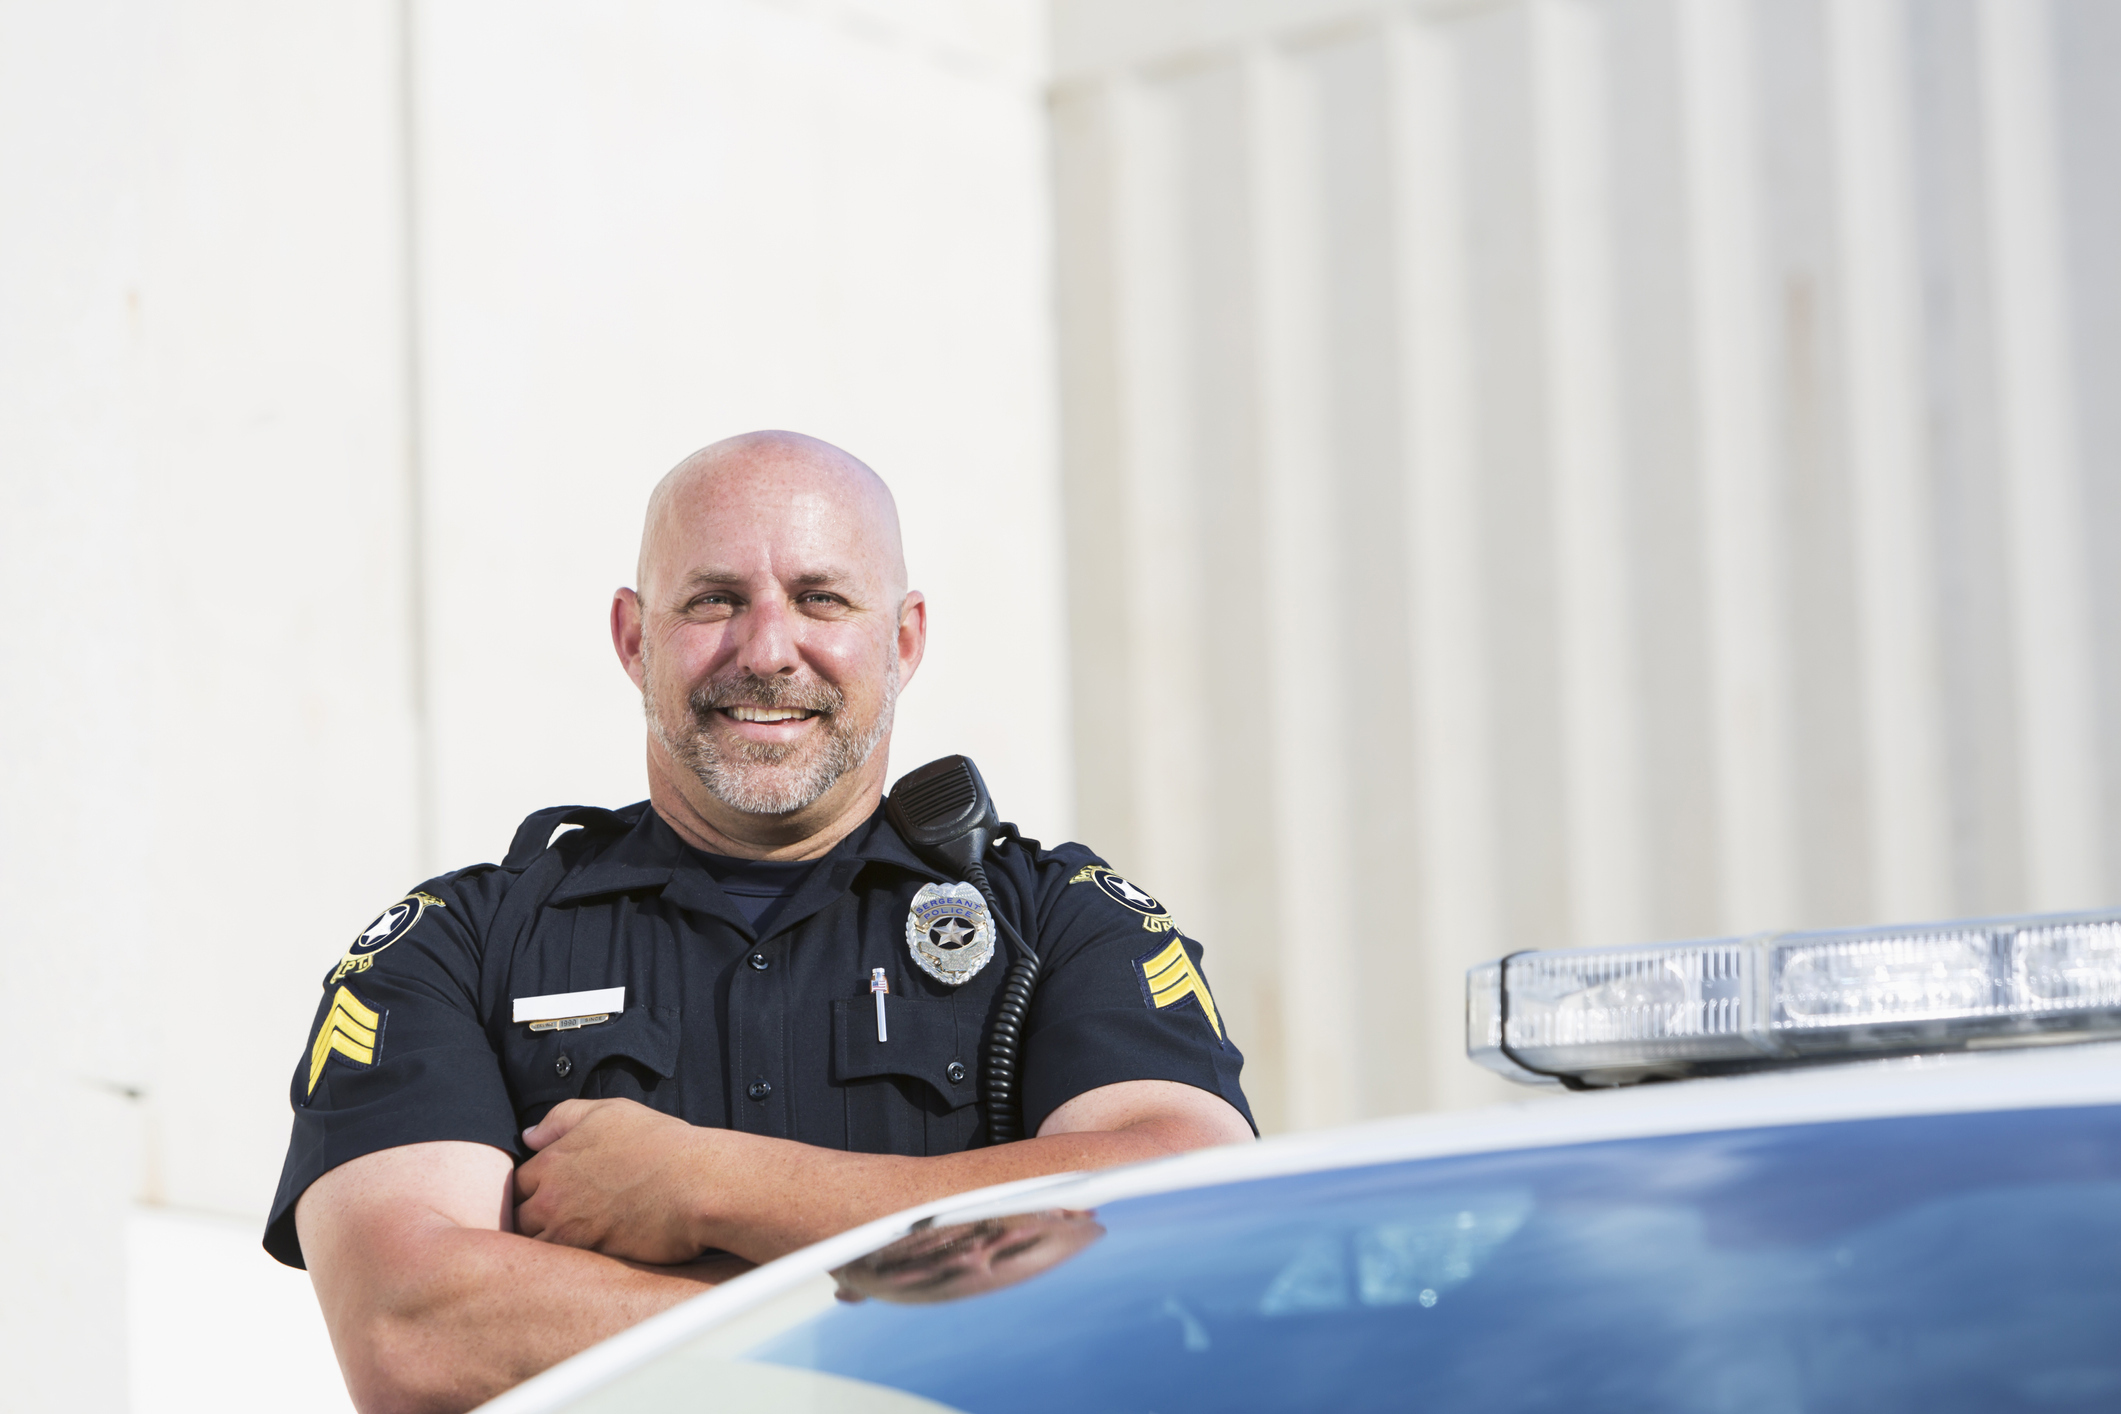 Policeman smiling, standing with arms crossed next to to his police car.   The man is in his mid 40s, heavyset and bald.  He is wearing a dark blue uniform.  Only the top of the cruiser, including the siren, is visible in the image.